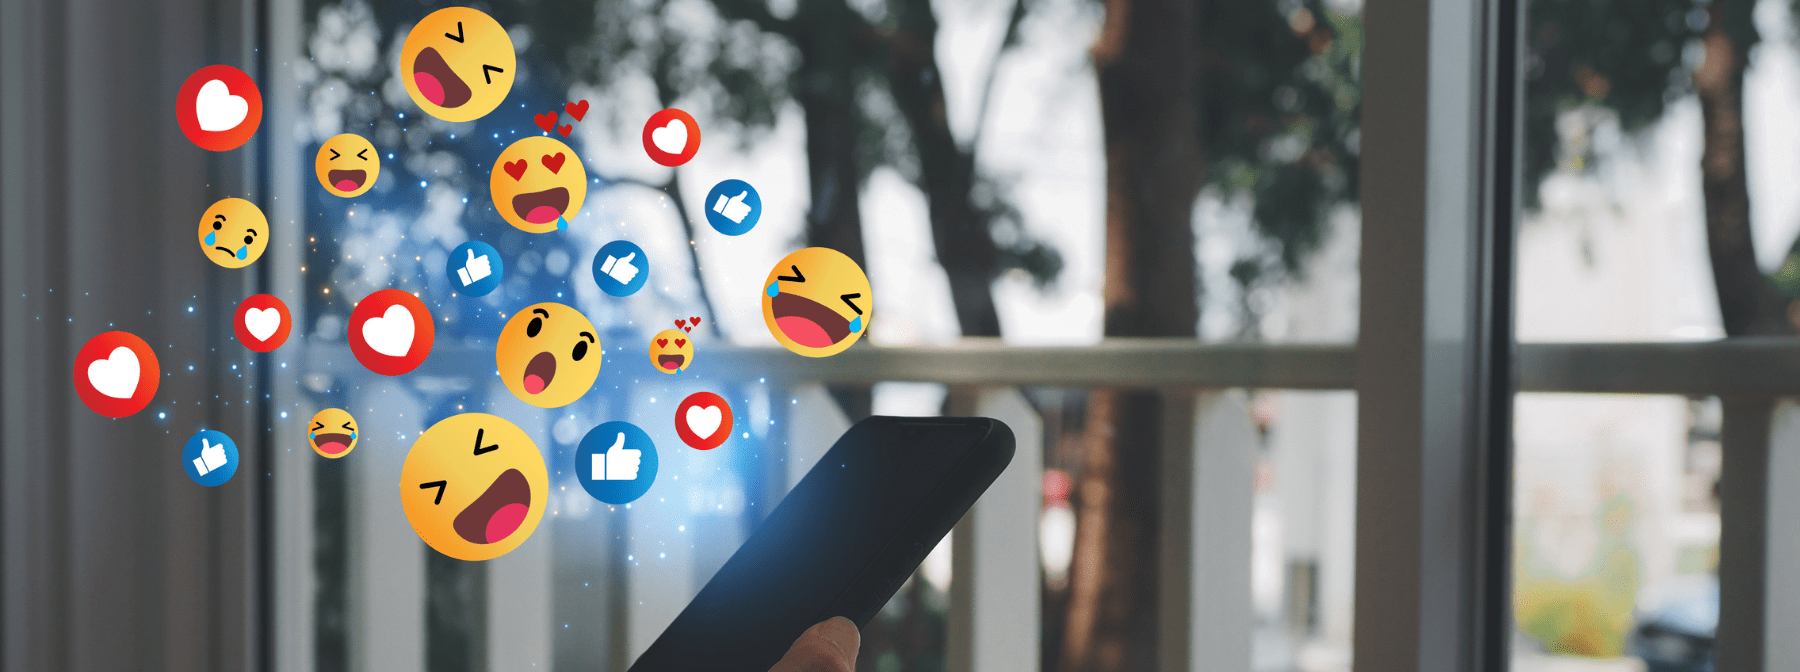 Study Shows Social Media Triggers Stress & Unhappiness